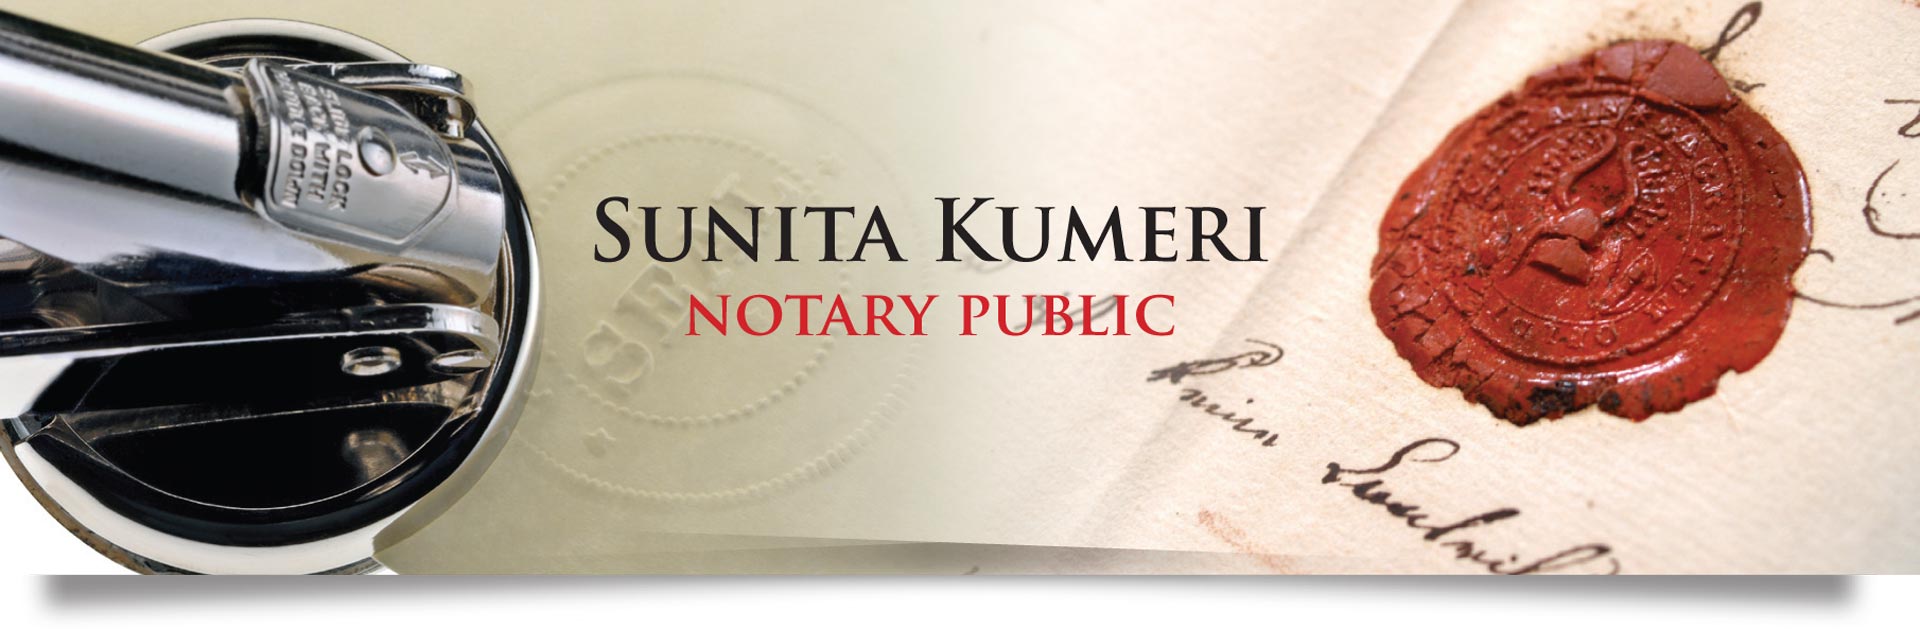 notary public Oxford